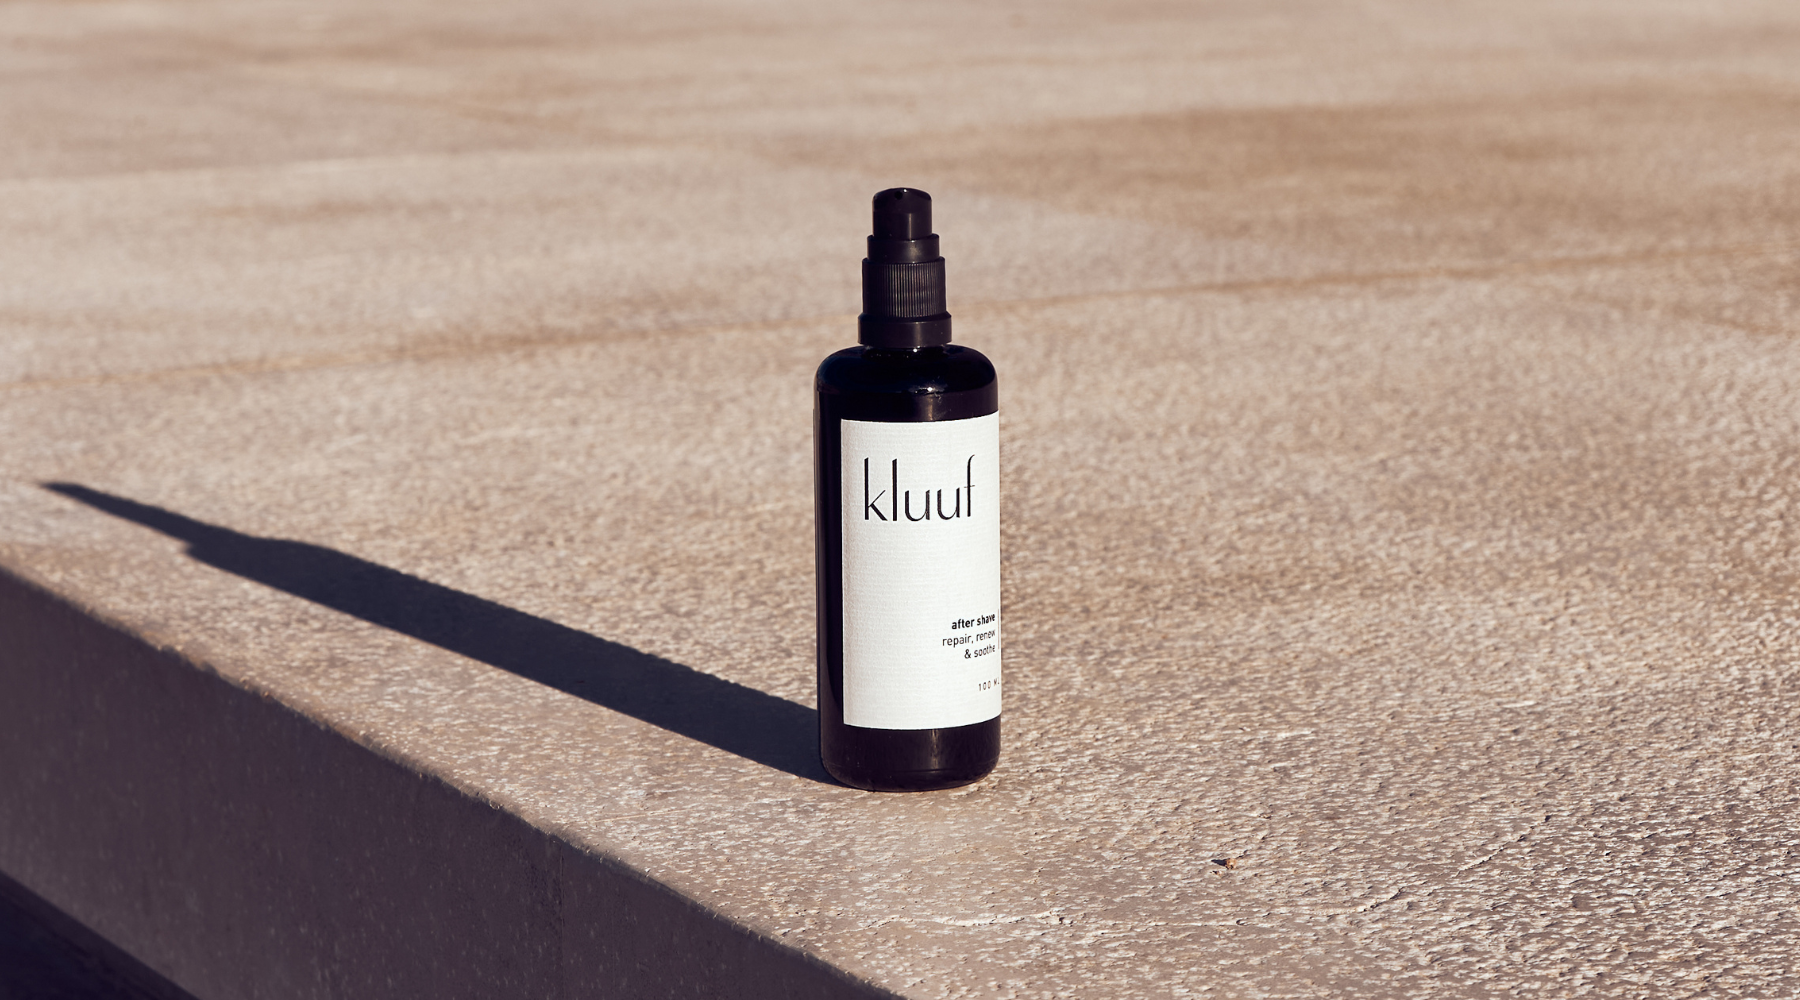 kluuf's sustainable after shave on stone ground with shadow